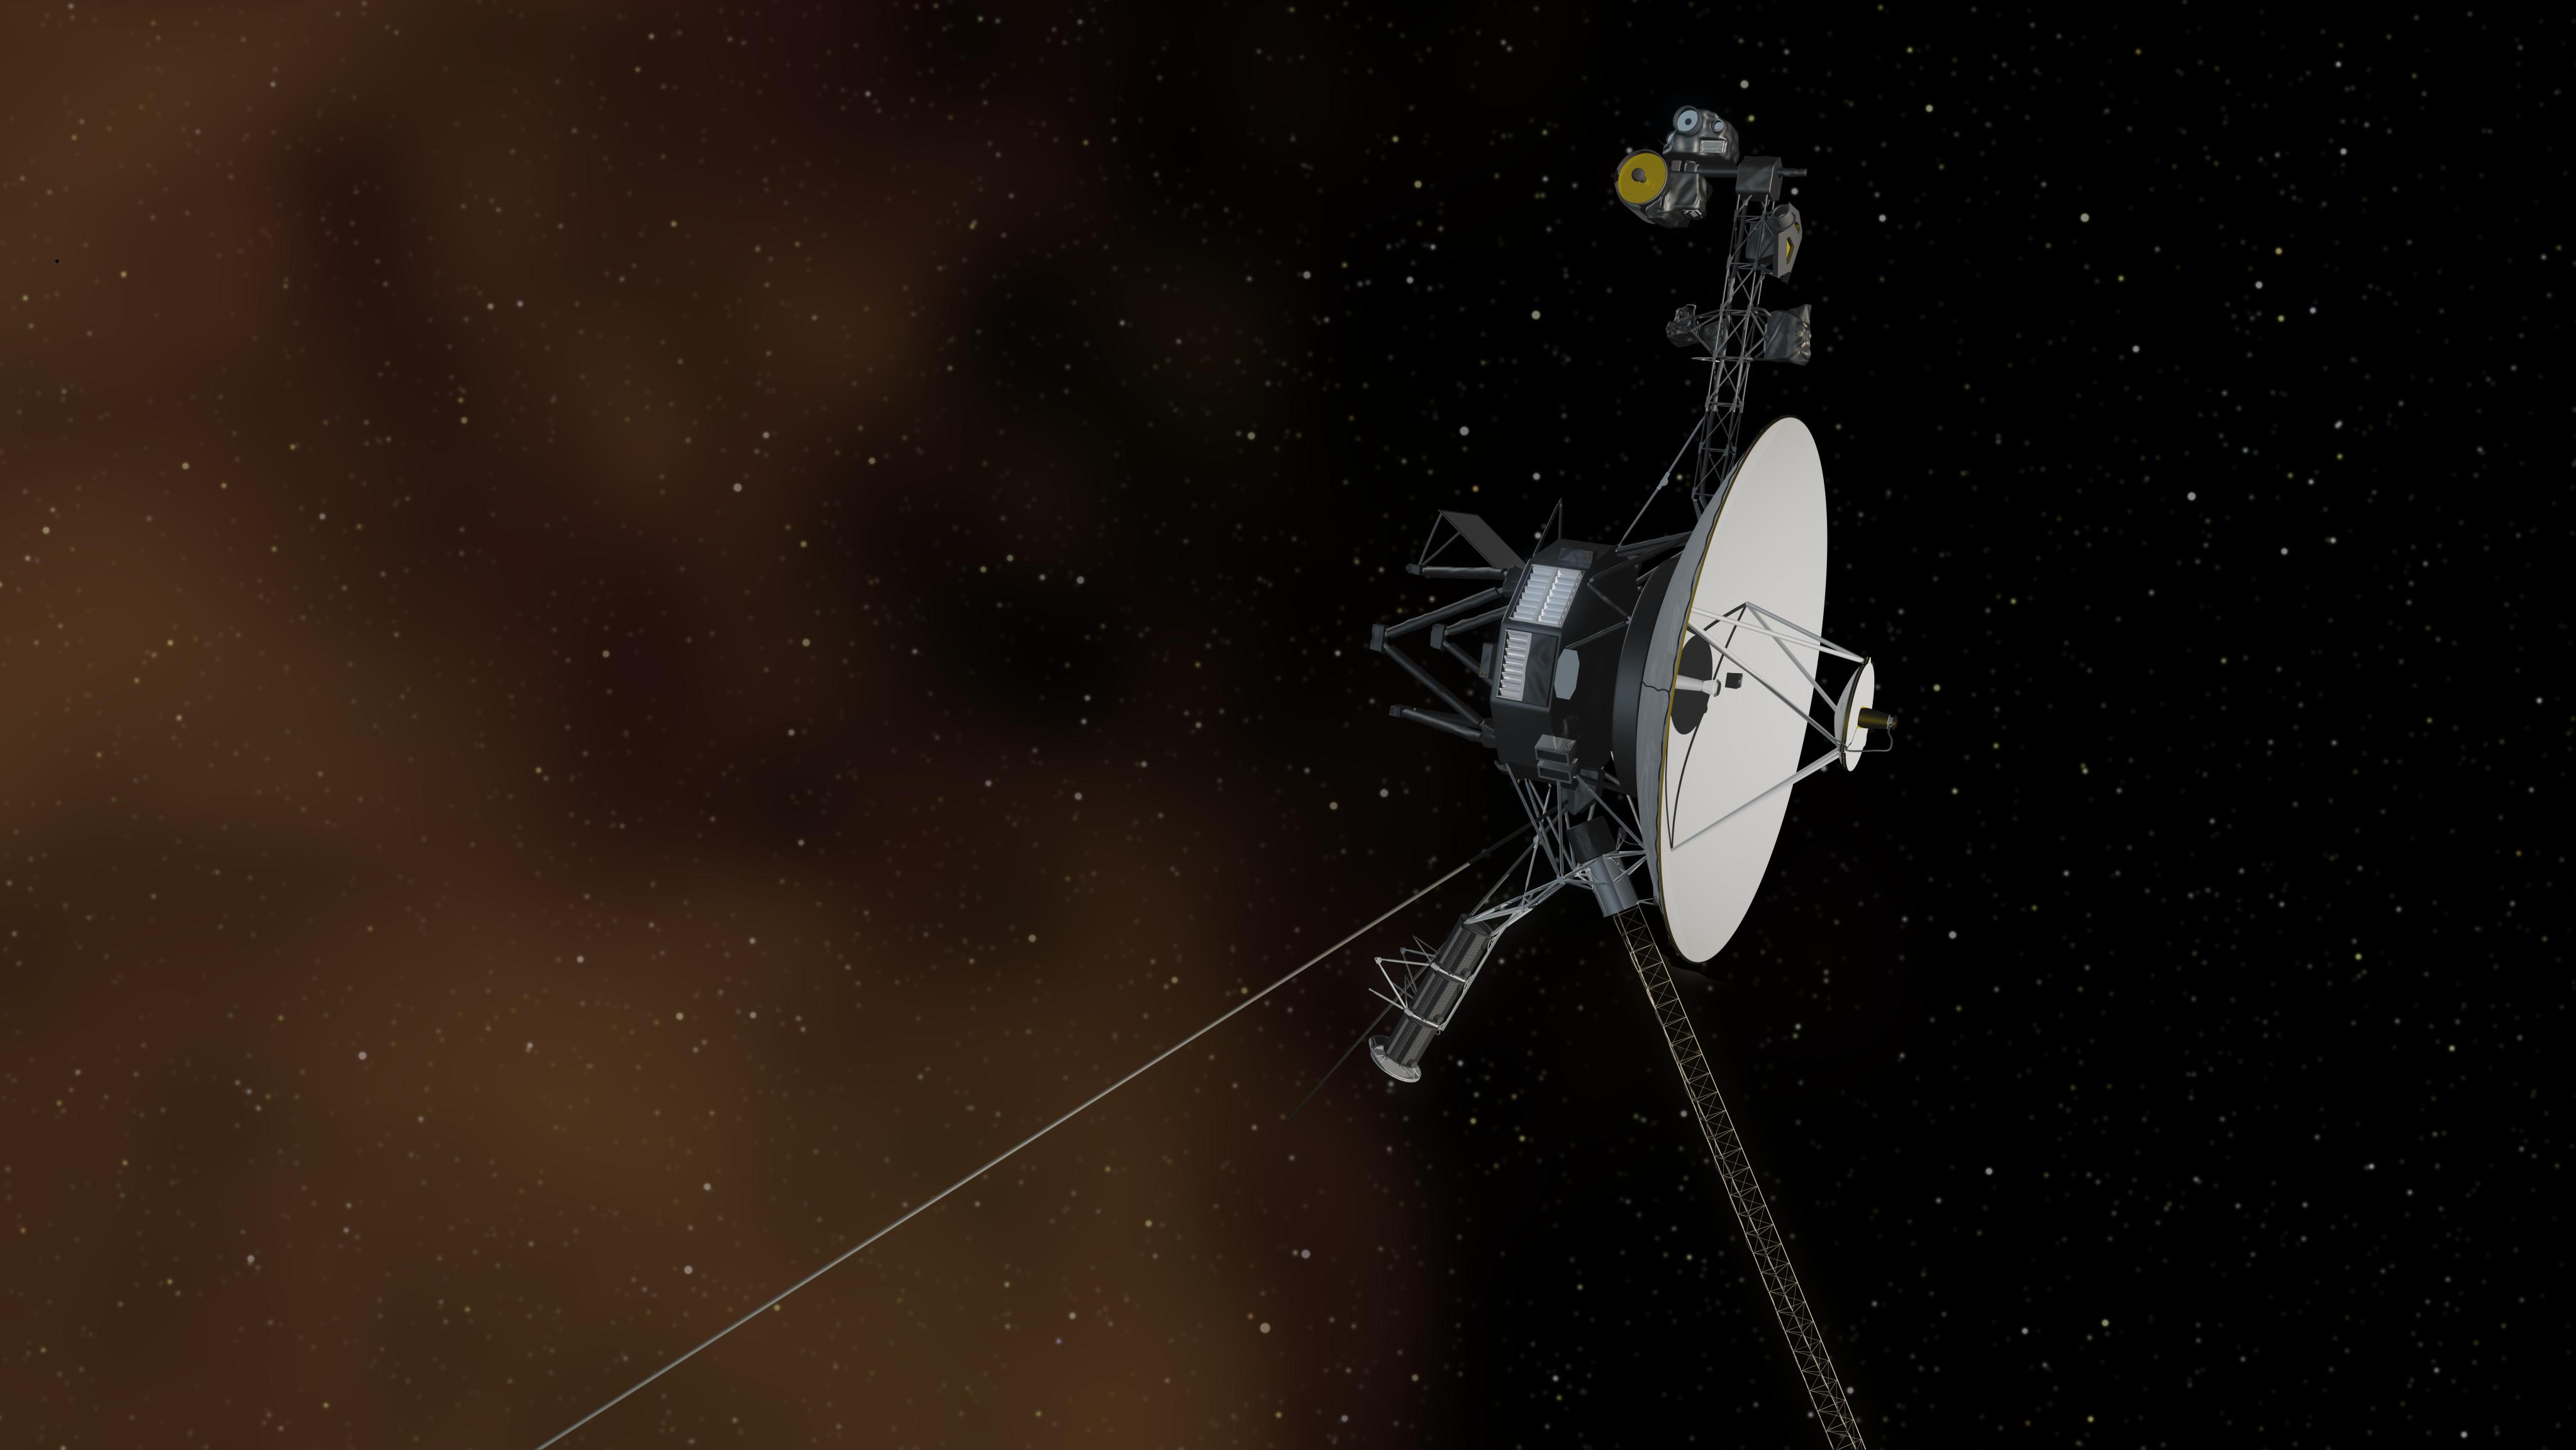 A Voyager spacecraft is shown in deep space among distant stars and gases.